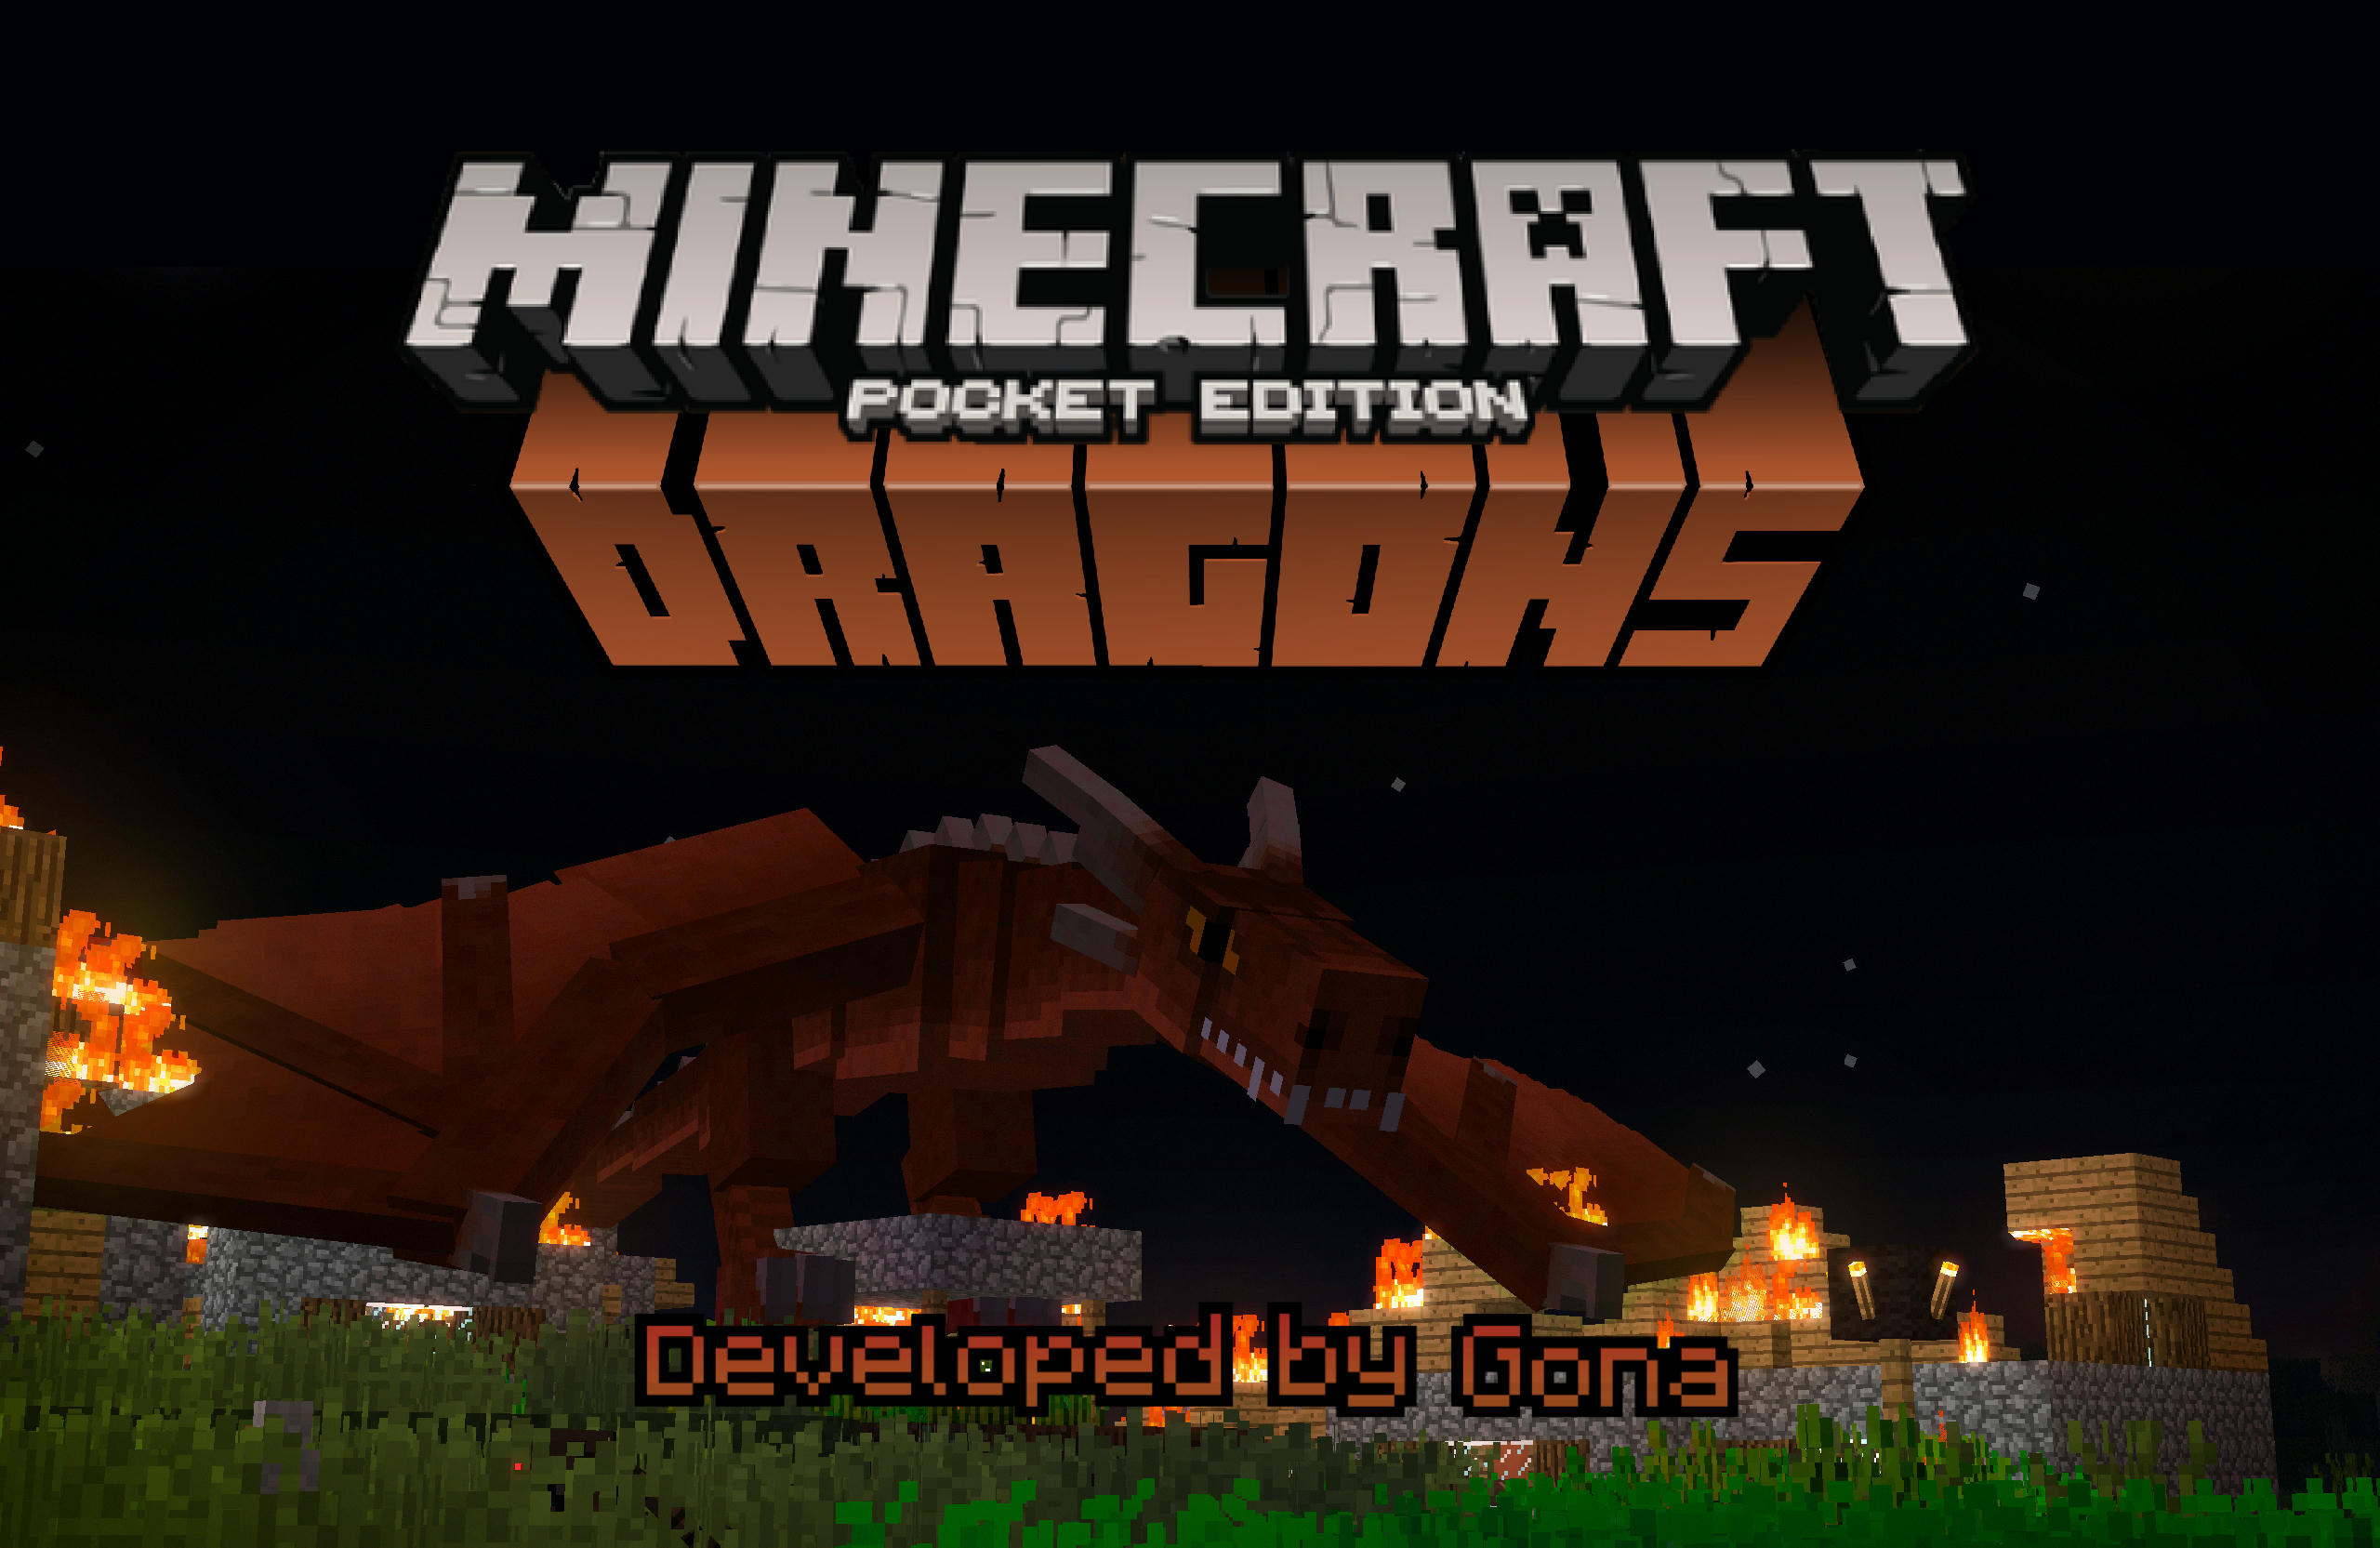 Dragons Add-On!!! Train Your Own Dragon! Android, Ios, Win10 - Mcpe: Mods /  Tools - Minecraft: Pocket Edition - Minecraft Forum - Minecraft Forum